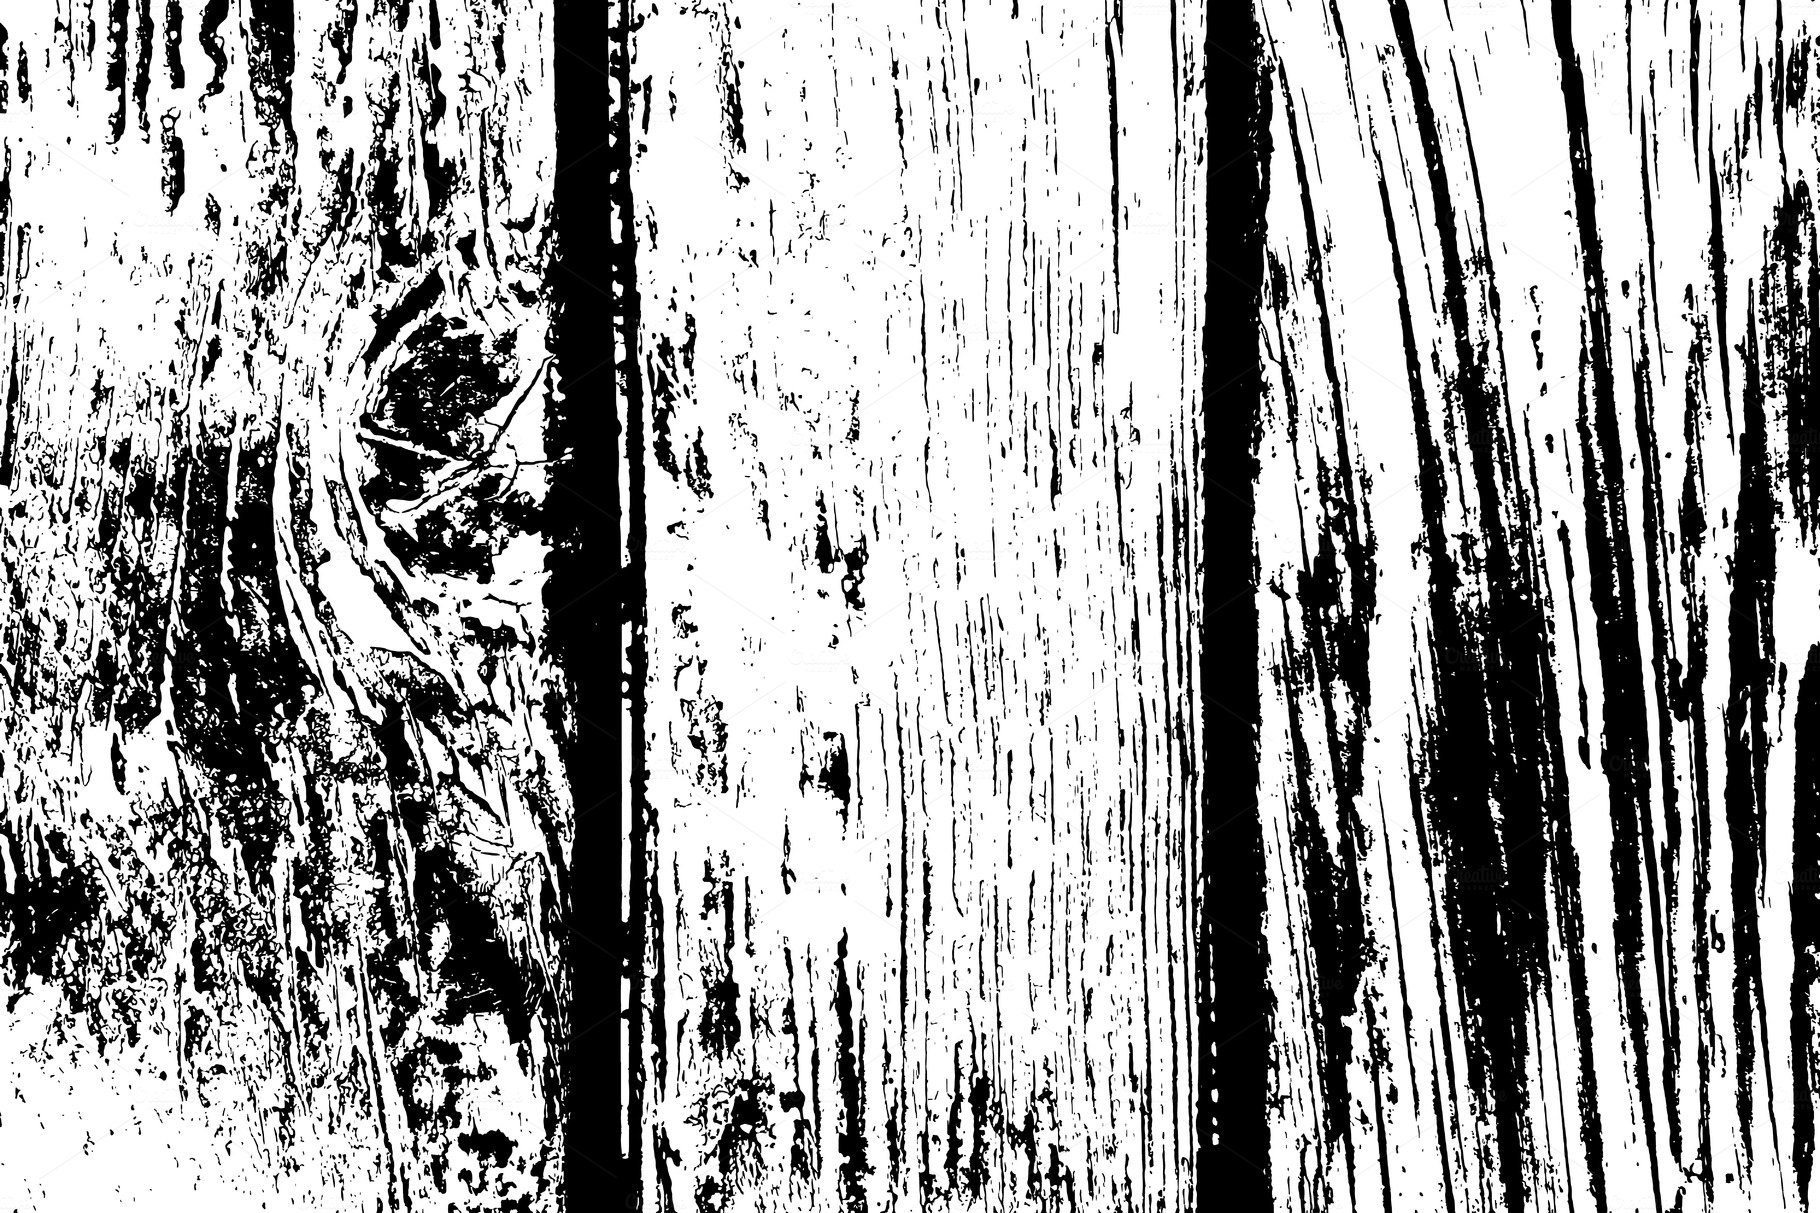 Wood Planks Overlay cover image.